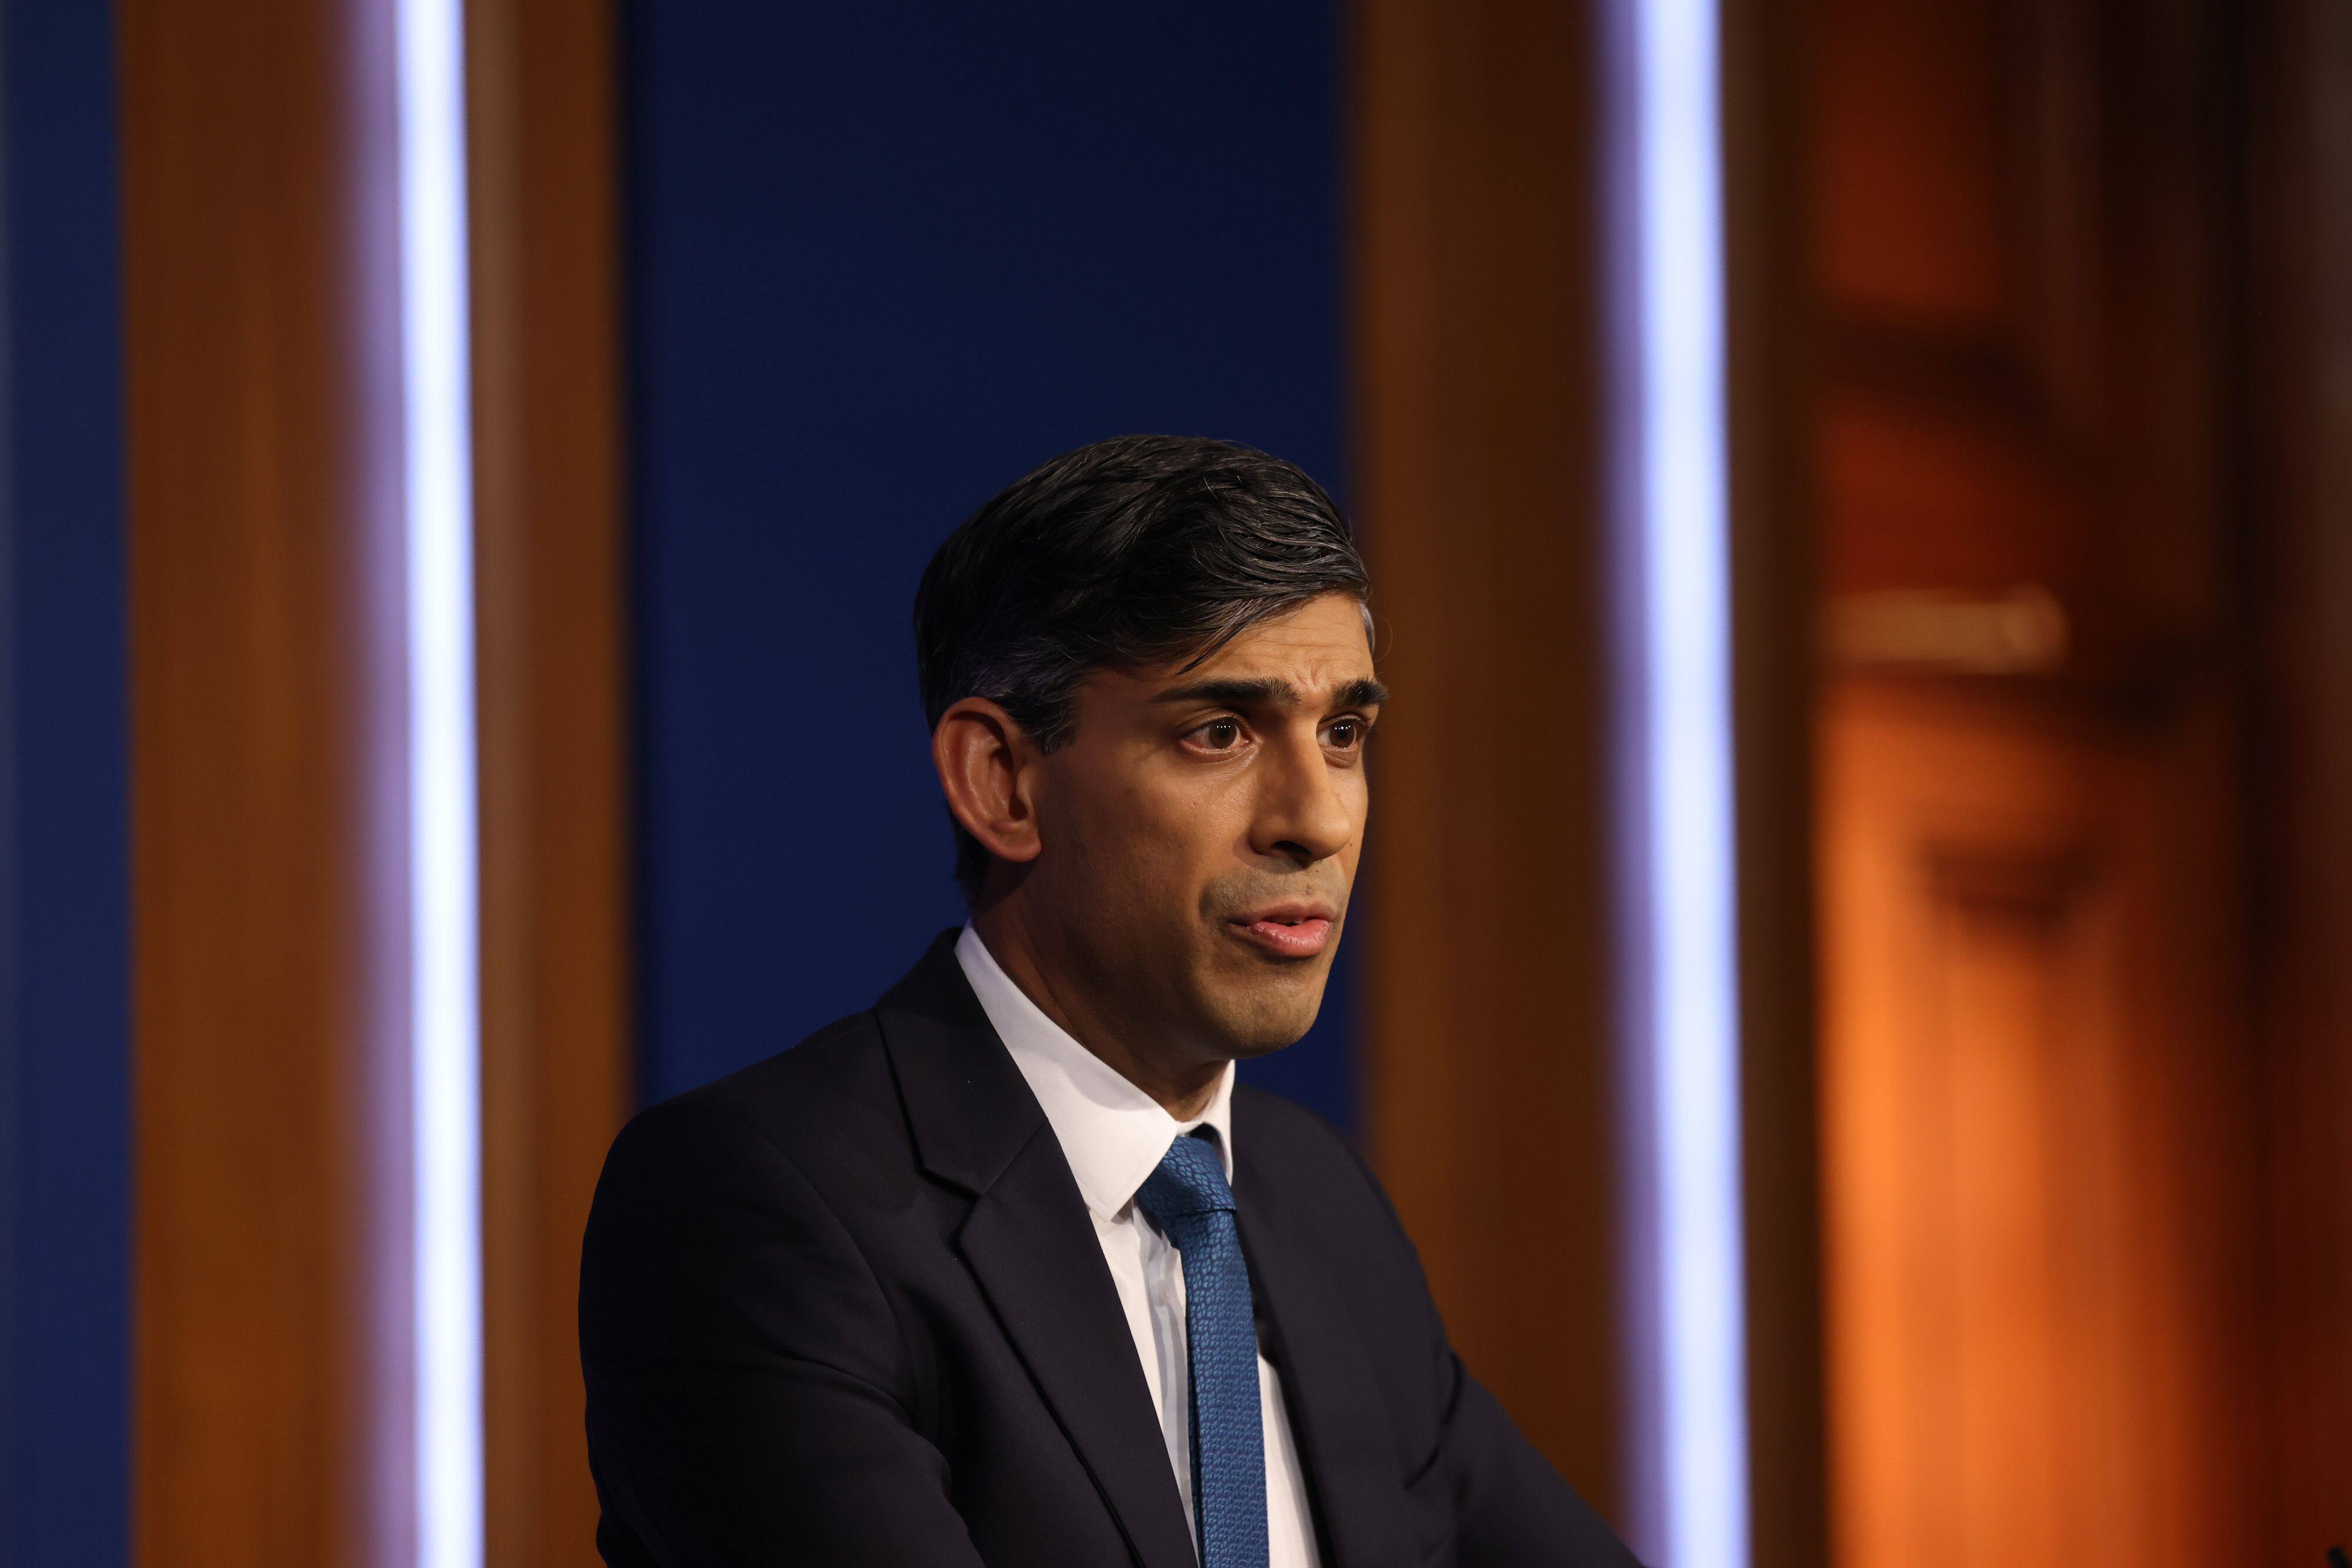 UK Prime Minister Rishi Sunak said he is not giving up on deporting asylum seekers to Rwanda and suggested he would be willing to change British laws to make it happen. Photo: Bloomberg